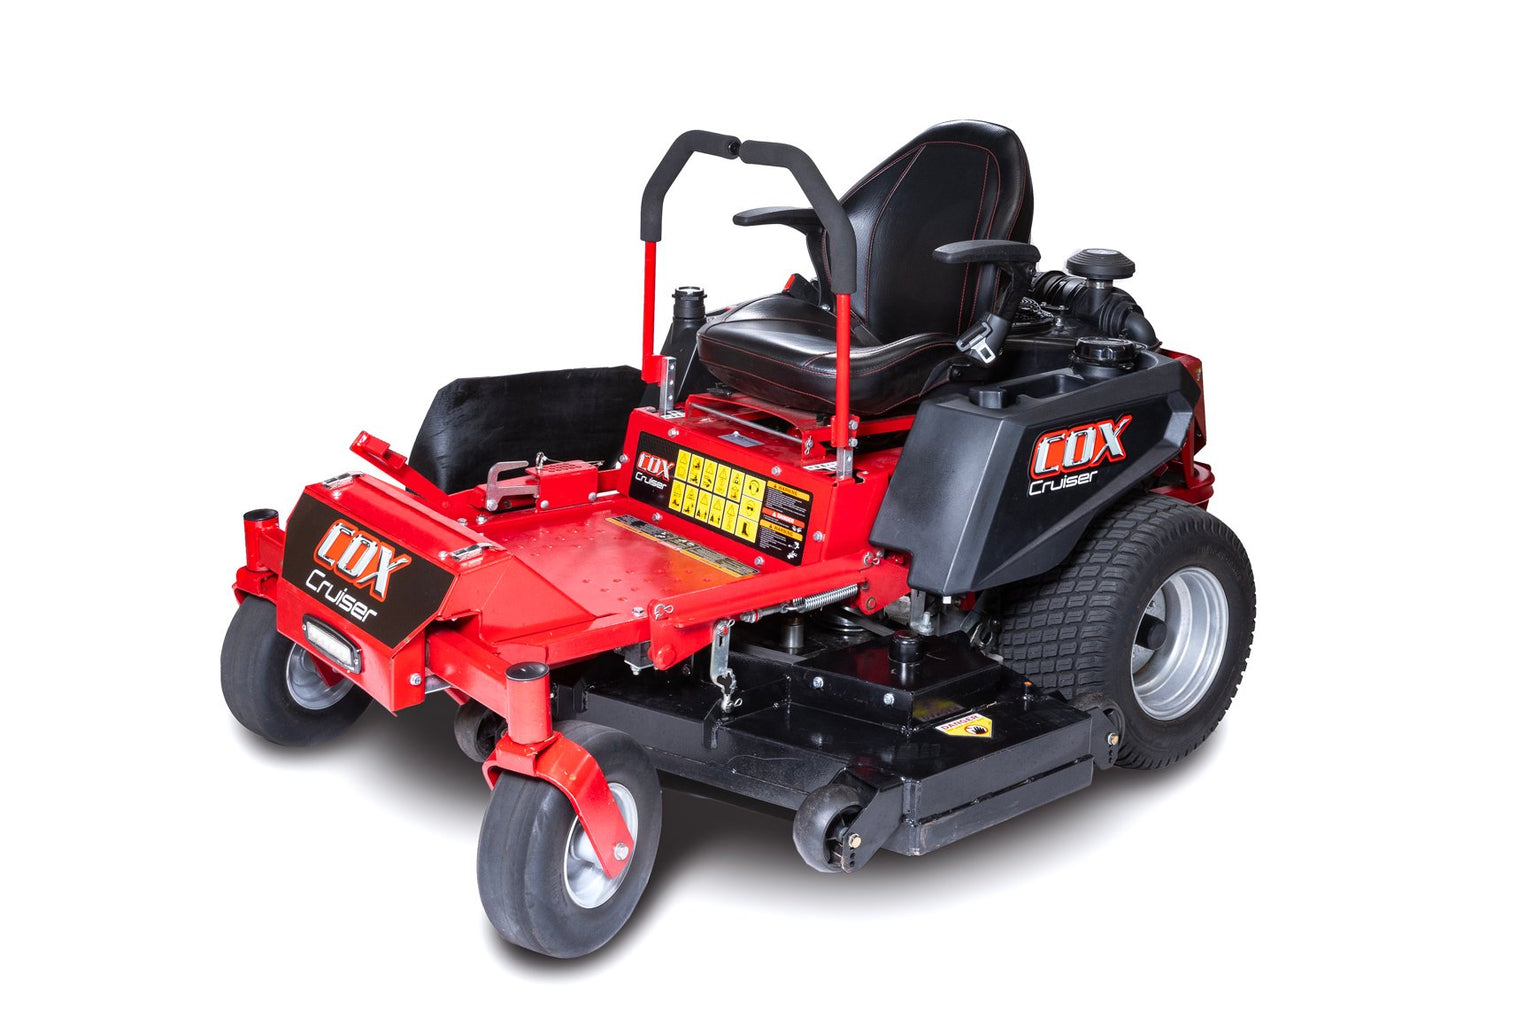 Product image of a COX Cruiser Zero Turn Ride On Mower